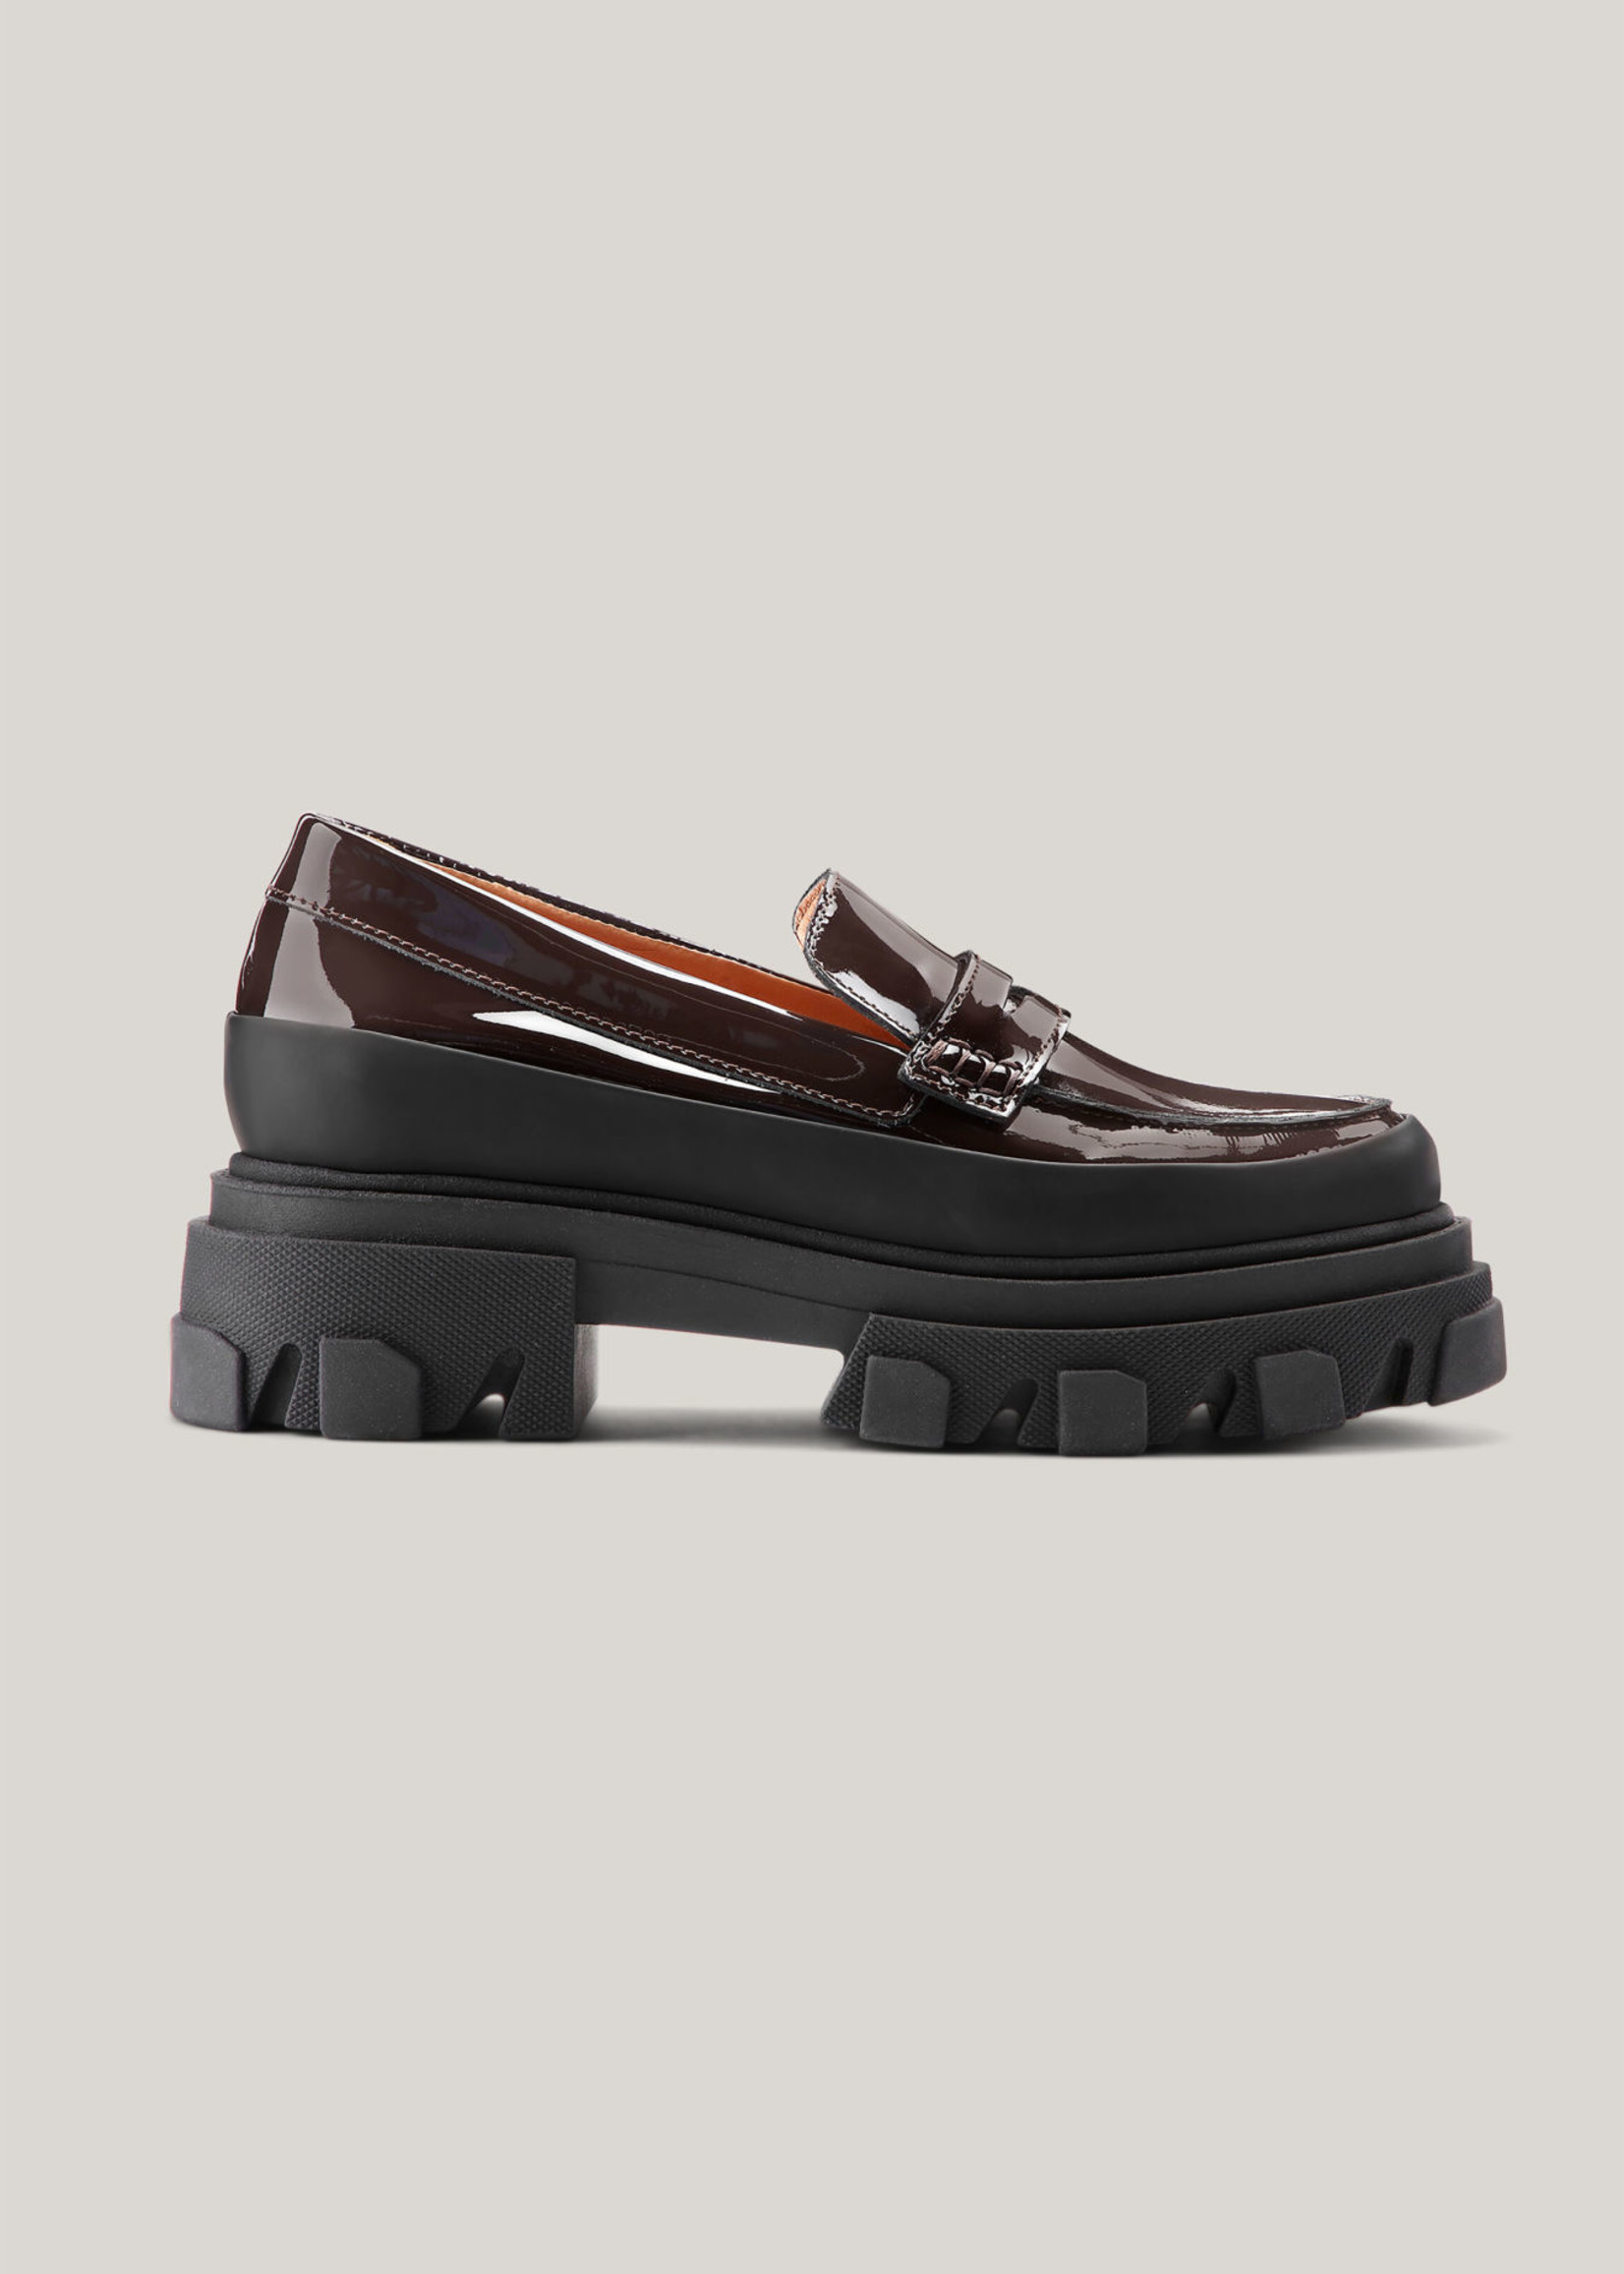 GANNI Chunky Loafers in Brown Patent Leather